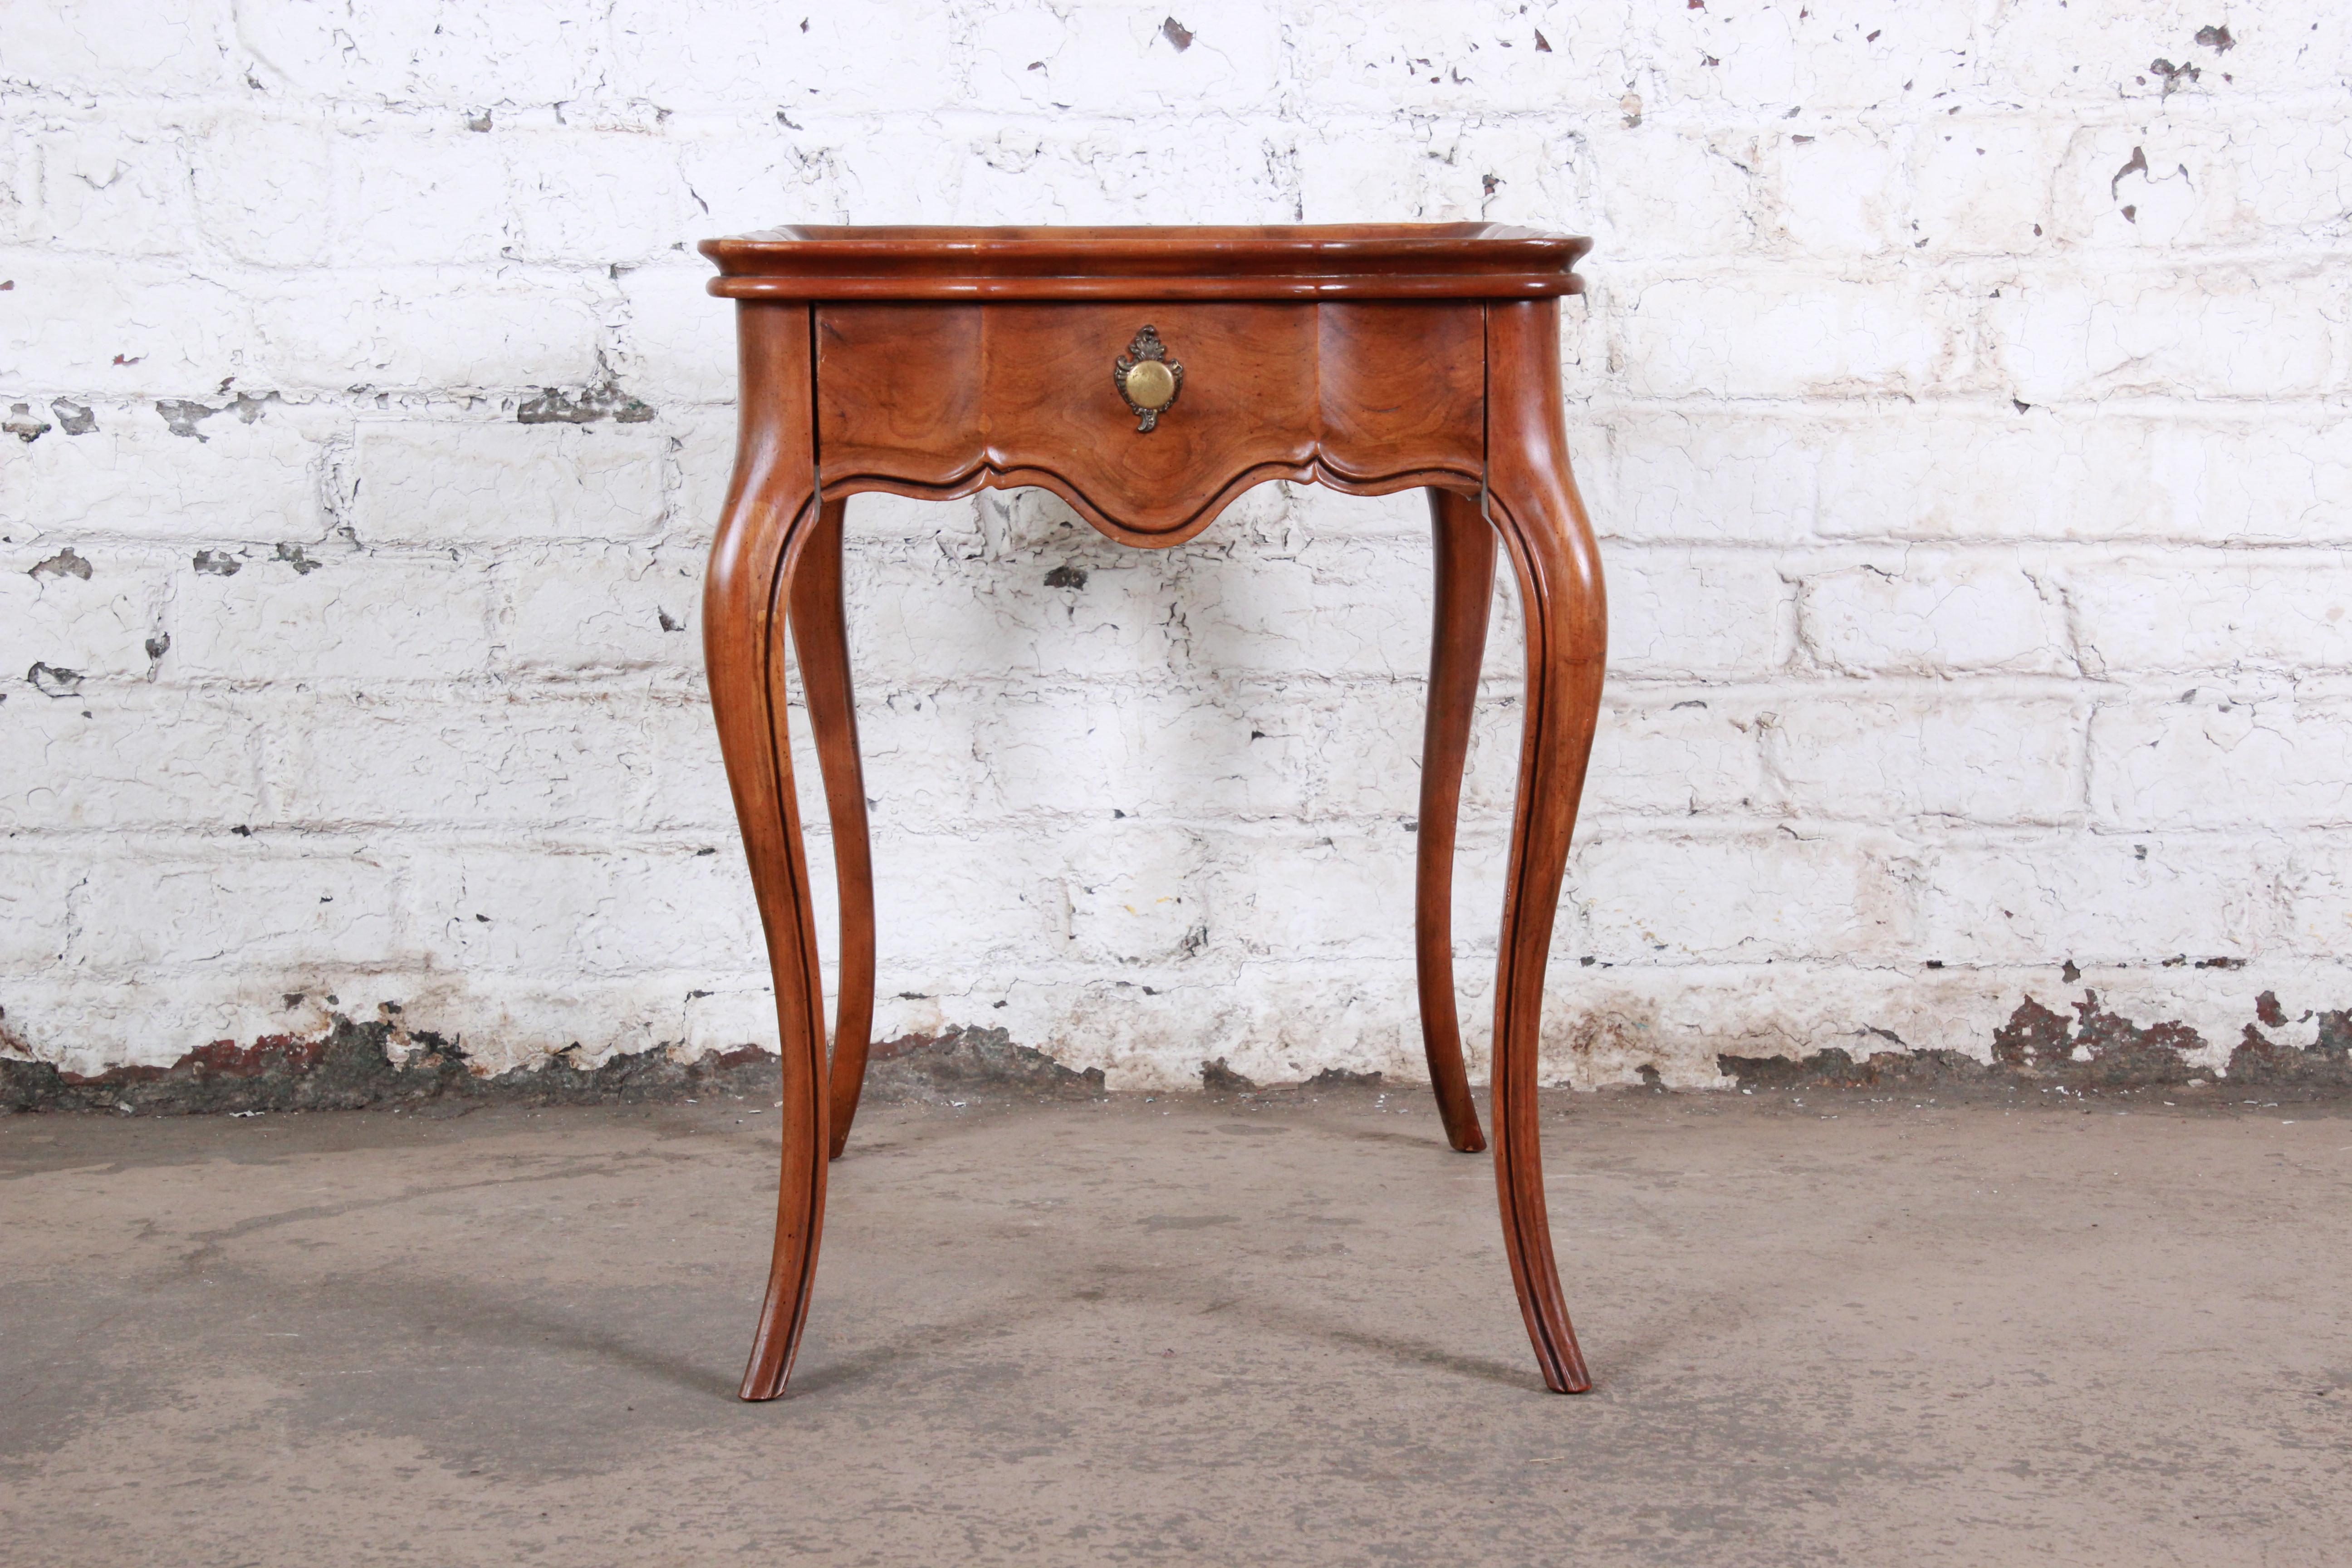 An excellent baker furniture French provincial burled walnut side table or end table. The table has Classic French styled legs with a French provincial design with its stunning burled walnut top. The table offers one drawer for storage. The table is